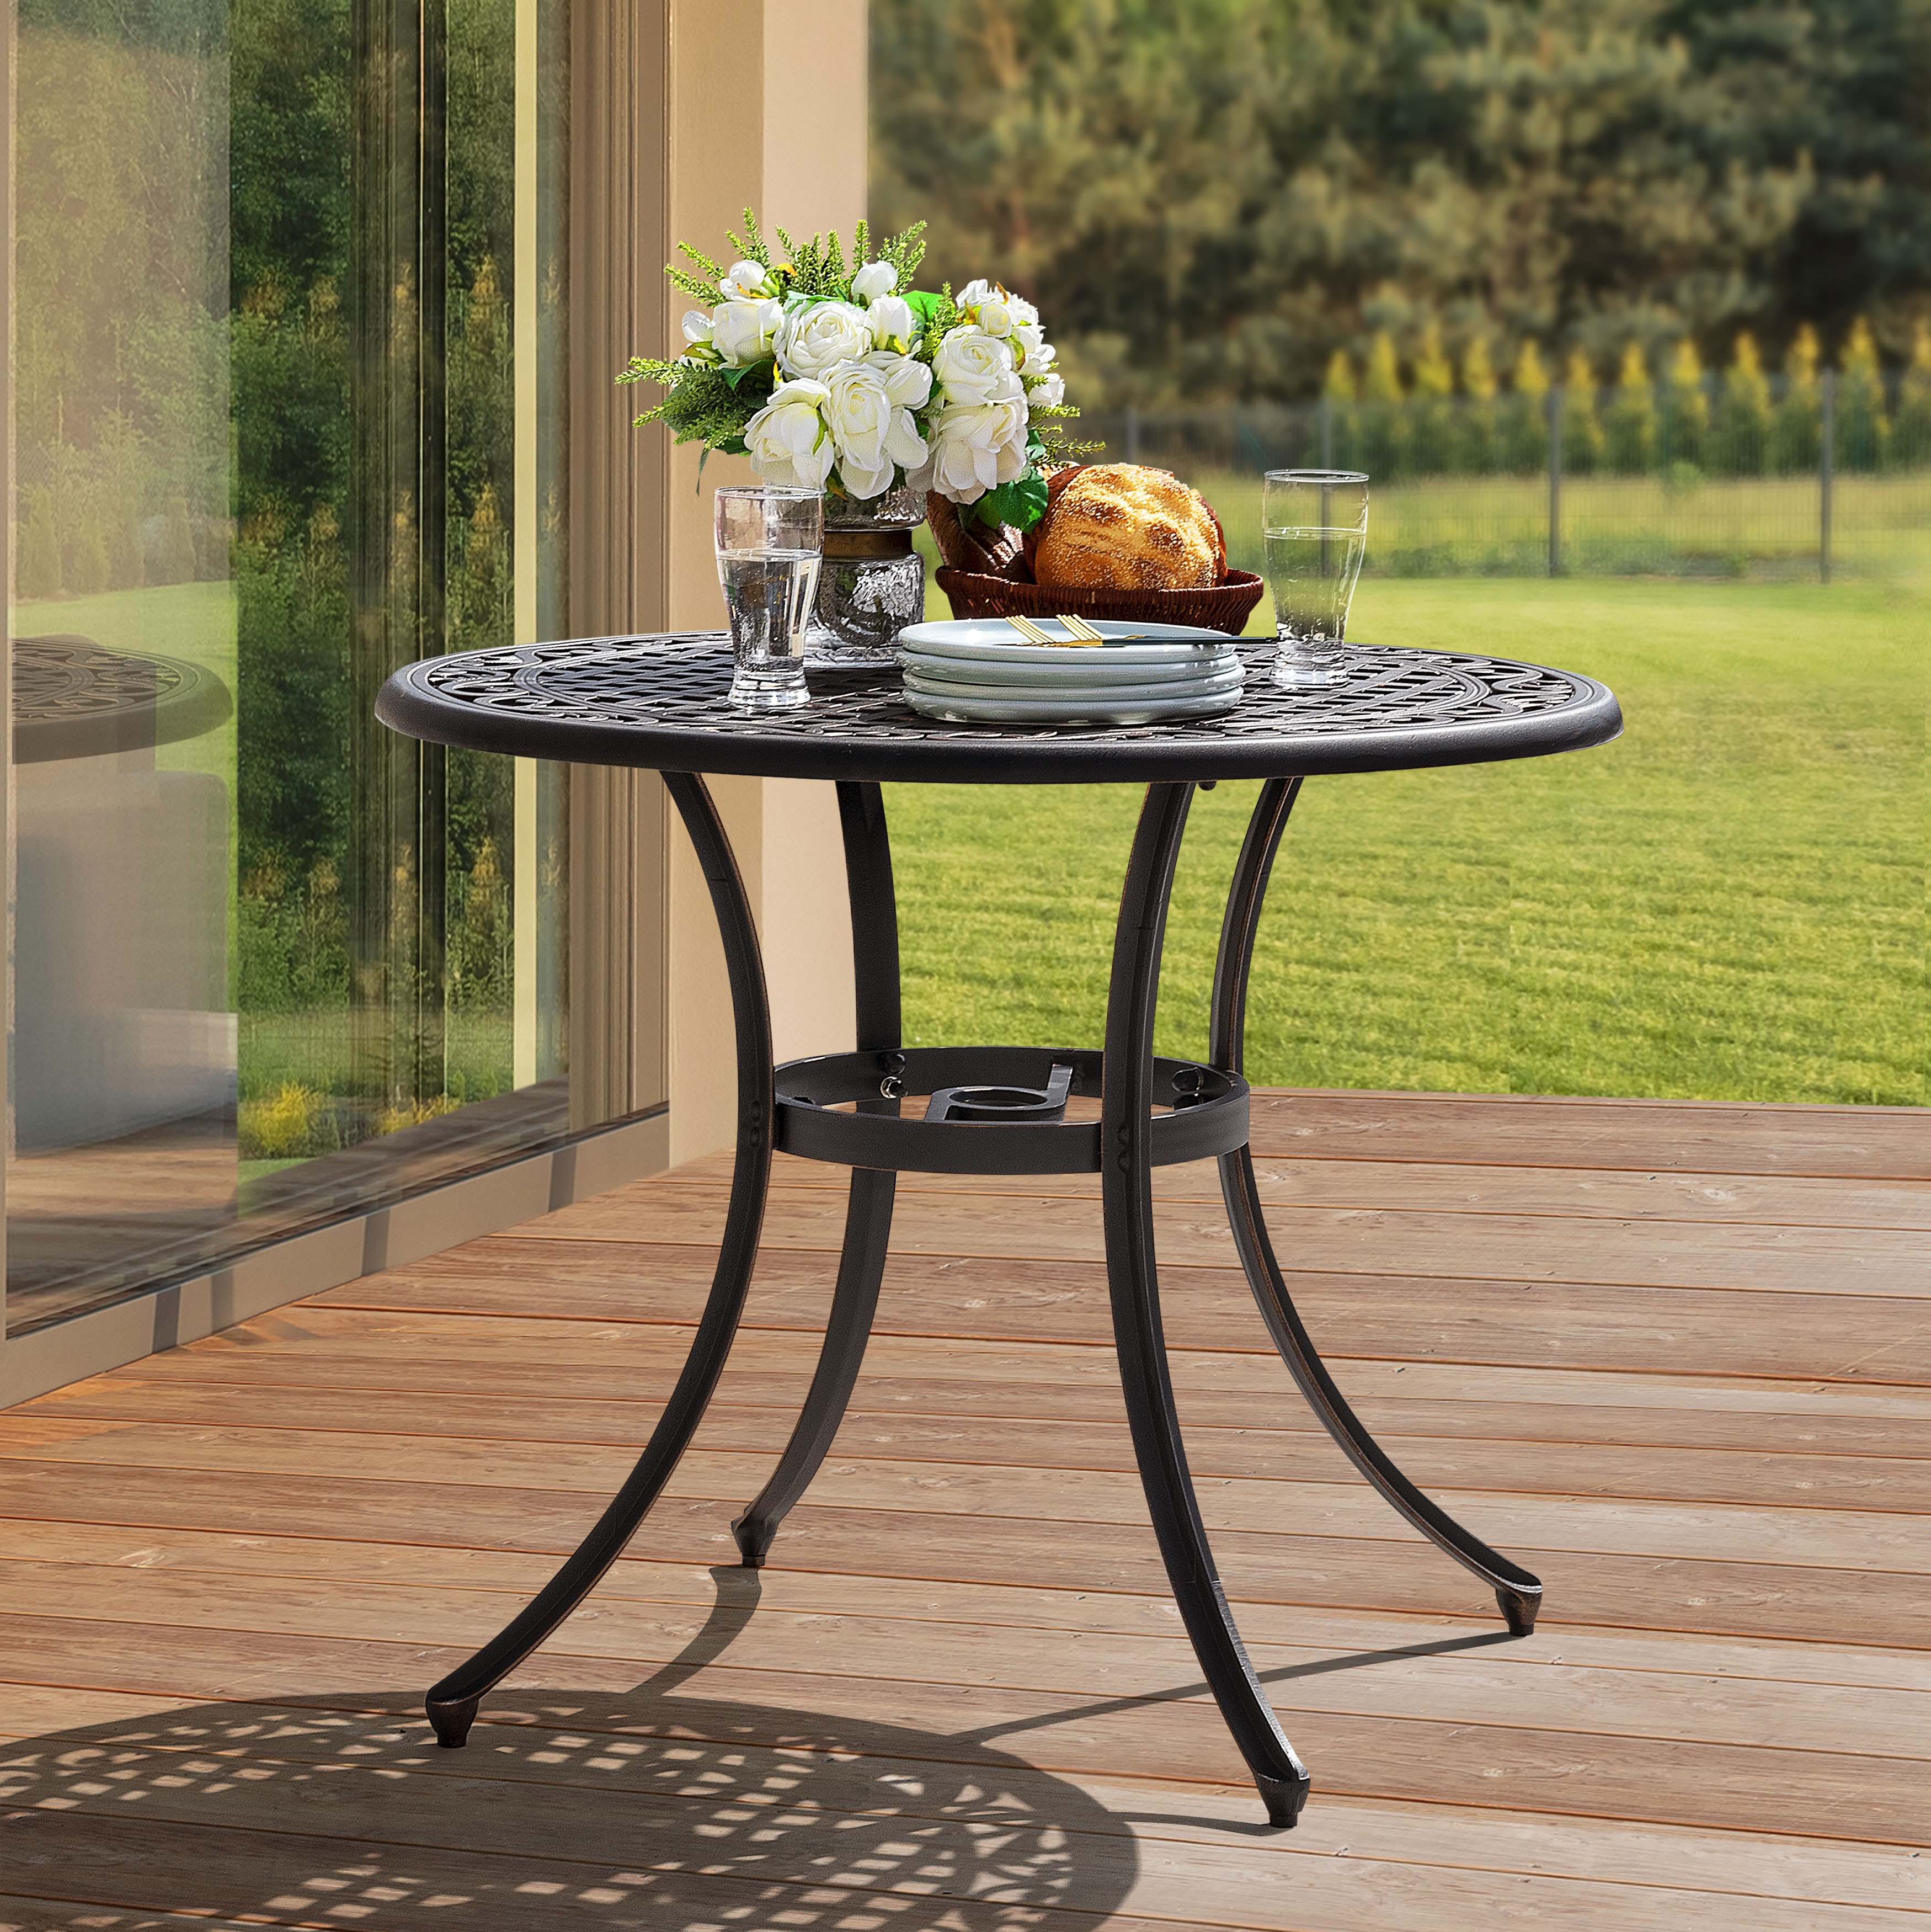 Nuu Garden 36" Cast Aluminum Outdoor Dining Table Round Patio Bistro Dining Table with Umbrella Hole,Black with Antique Bronze at The Edge - image 3 of 9